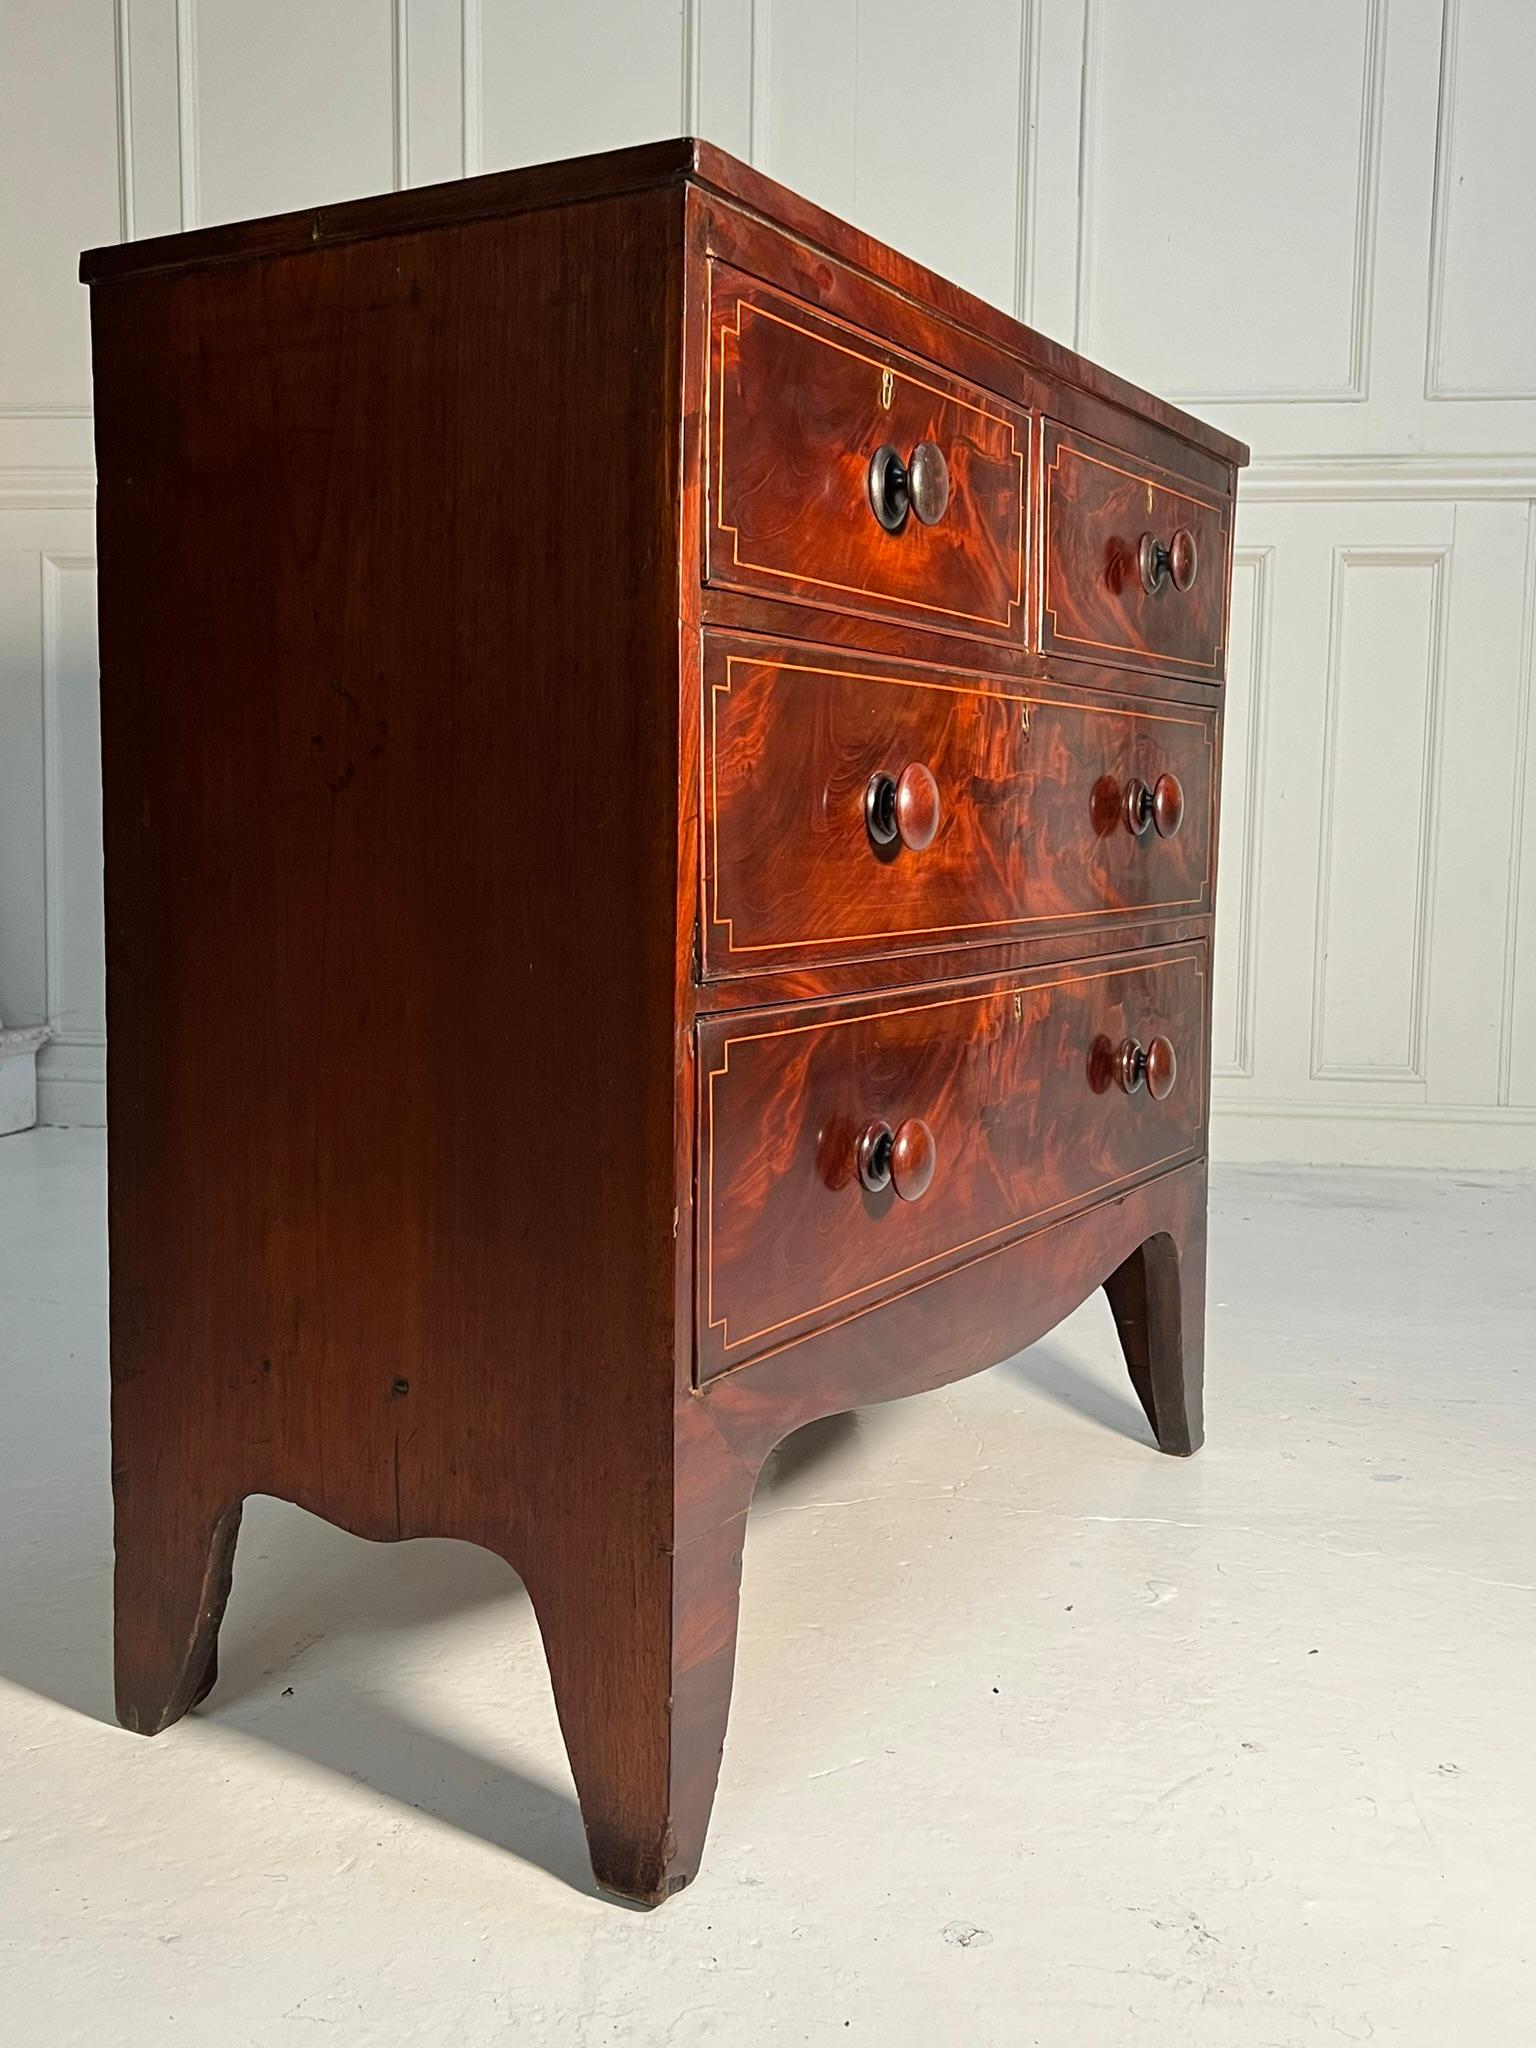 Beautifully figured Mahogany chest of drawers with boxwood stringing to the drawer fronts and top.

Standing on splayed legs adjoined by a sweeping stretcher.

English C1810.

Height 97cm
Width 97cm
Depth 47cm

(measurements are approximate and are